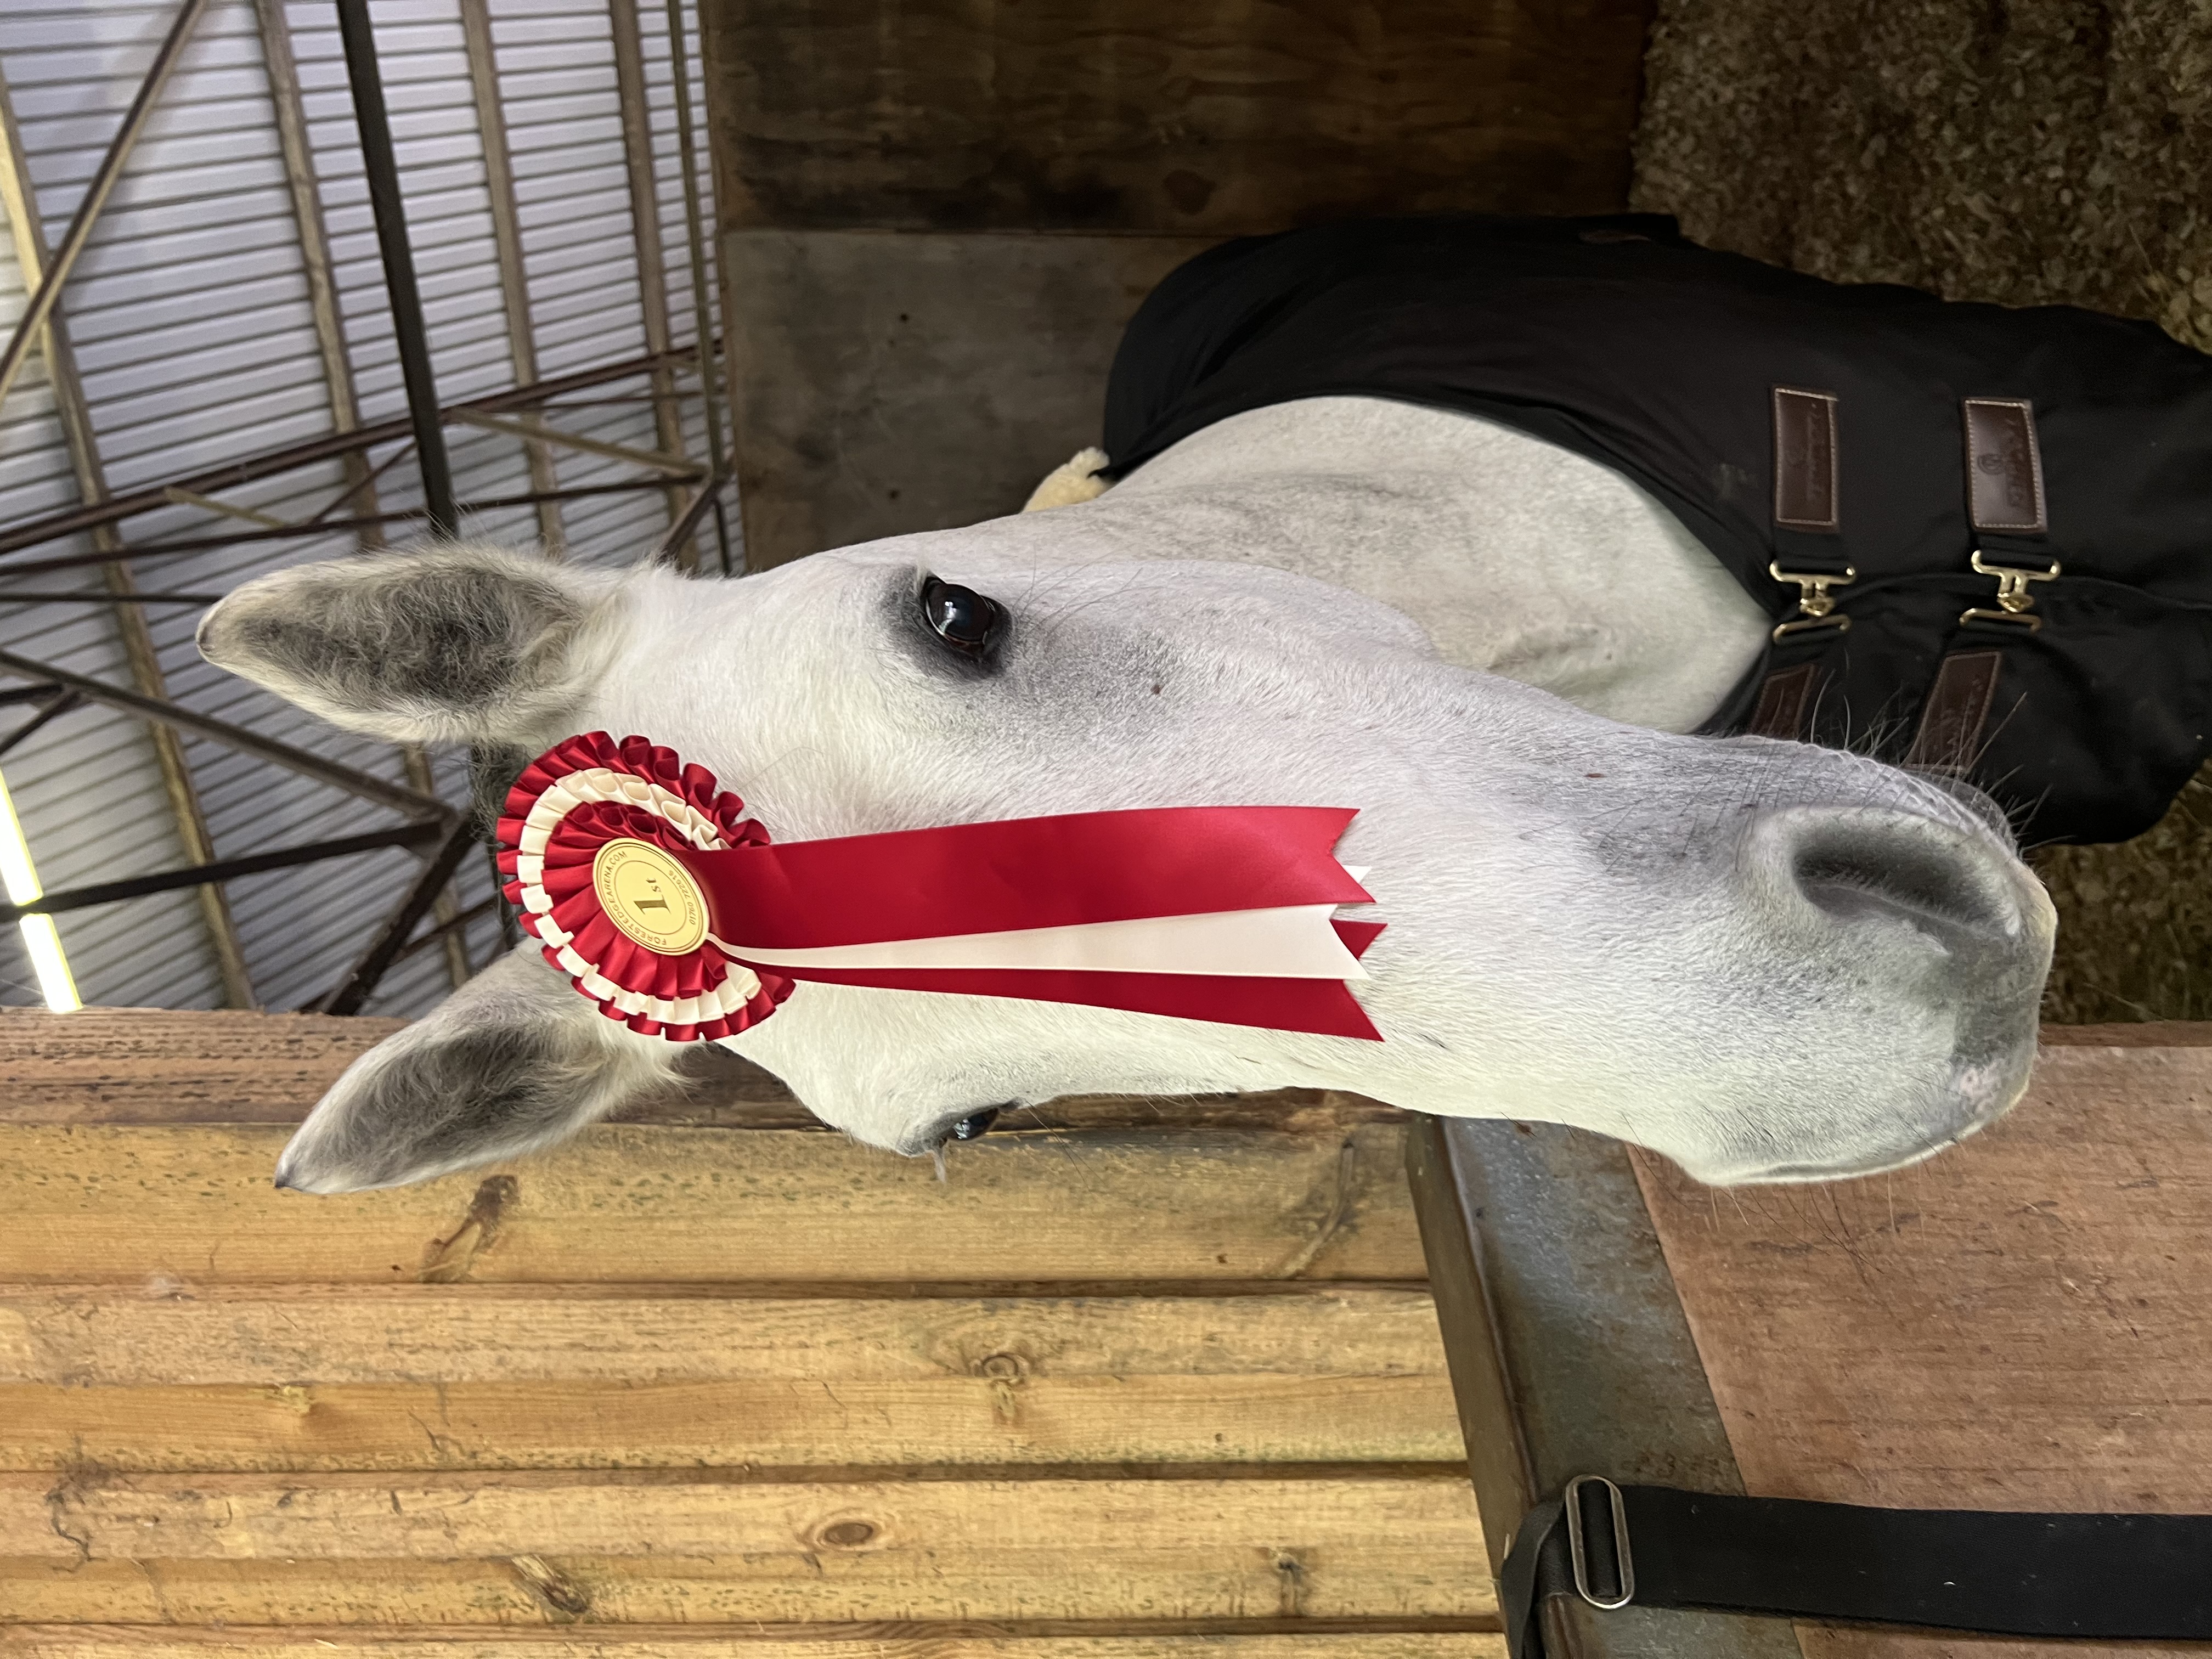 Horse with prize rosette